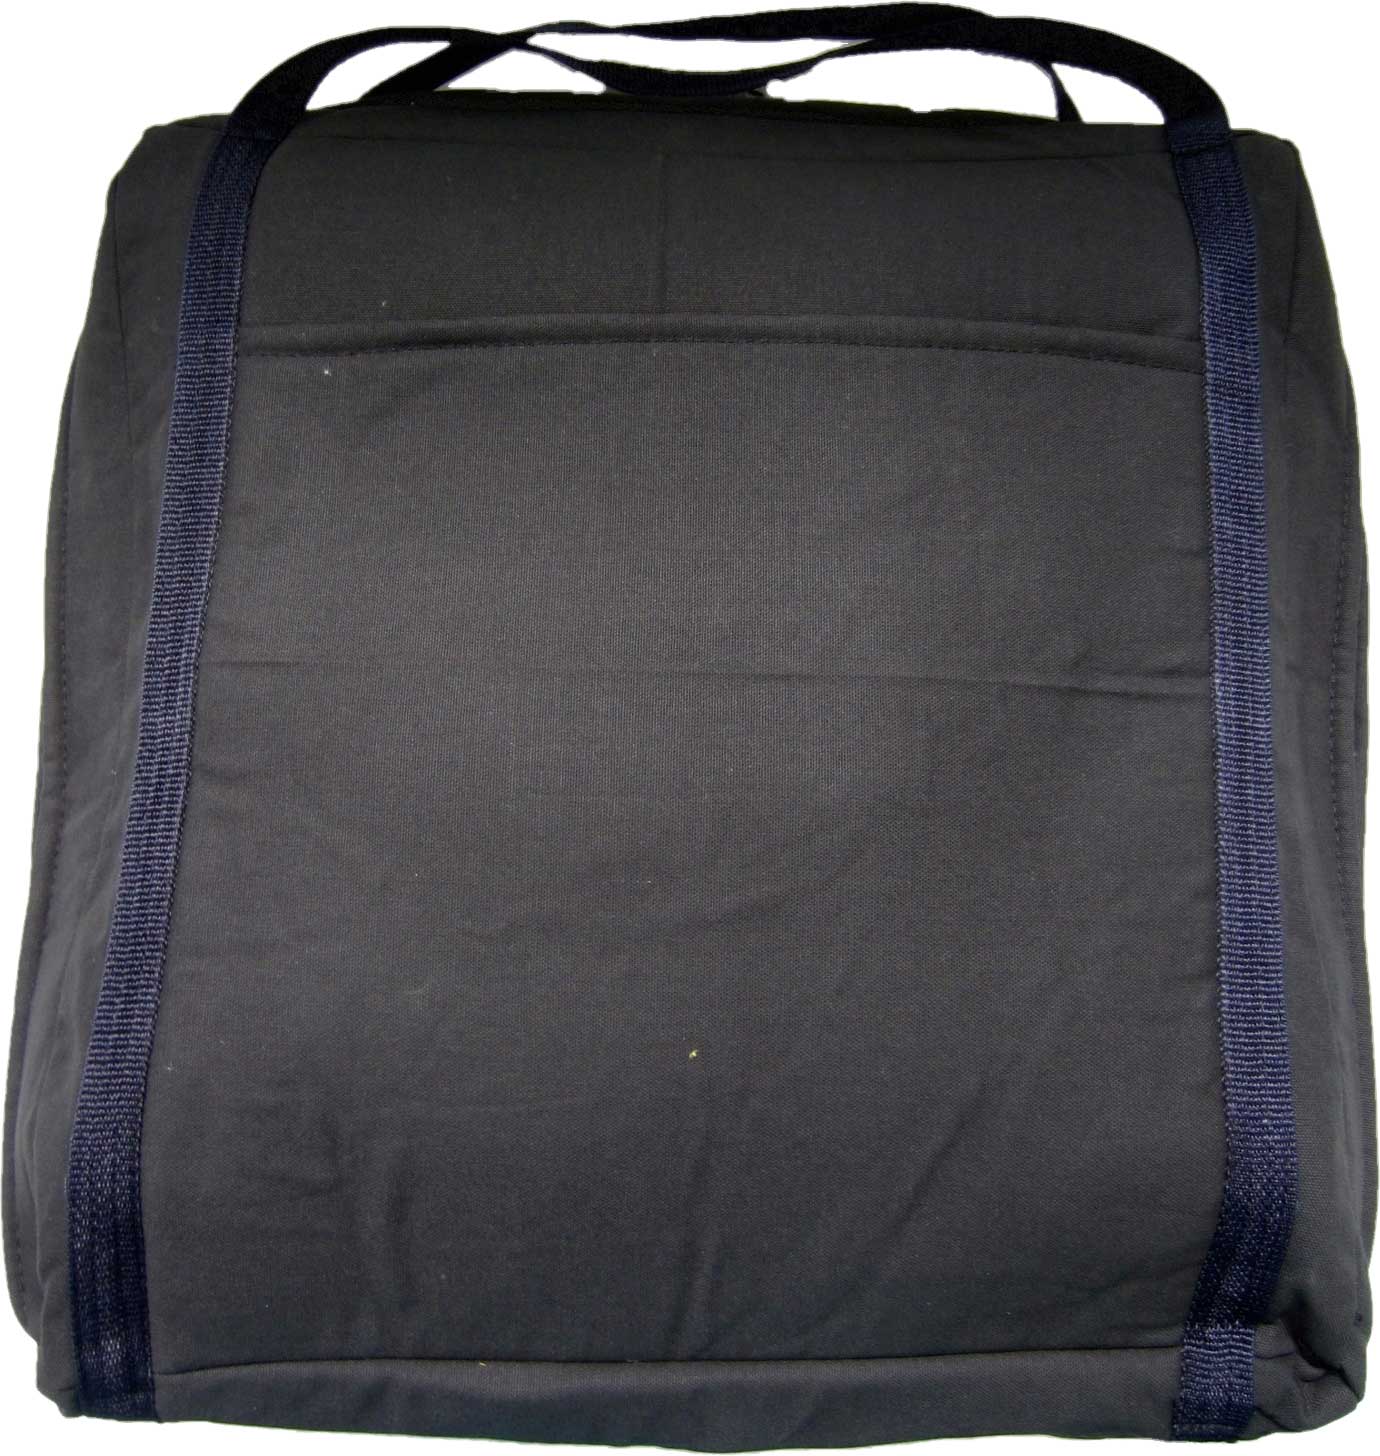 Carry Bag for Mirror